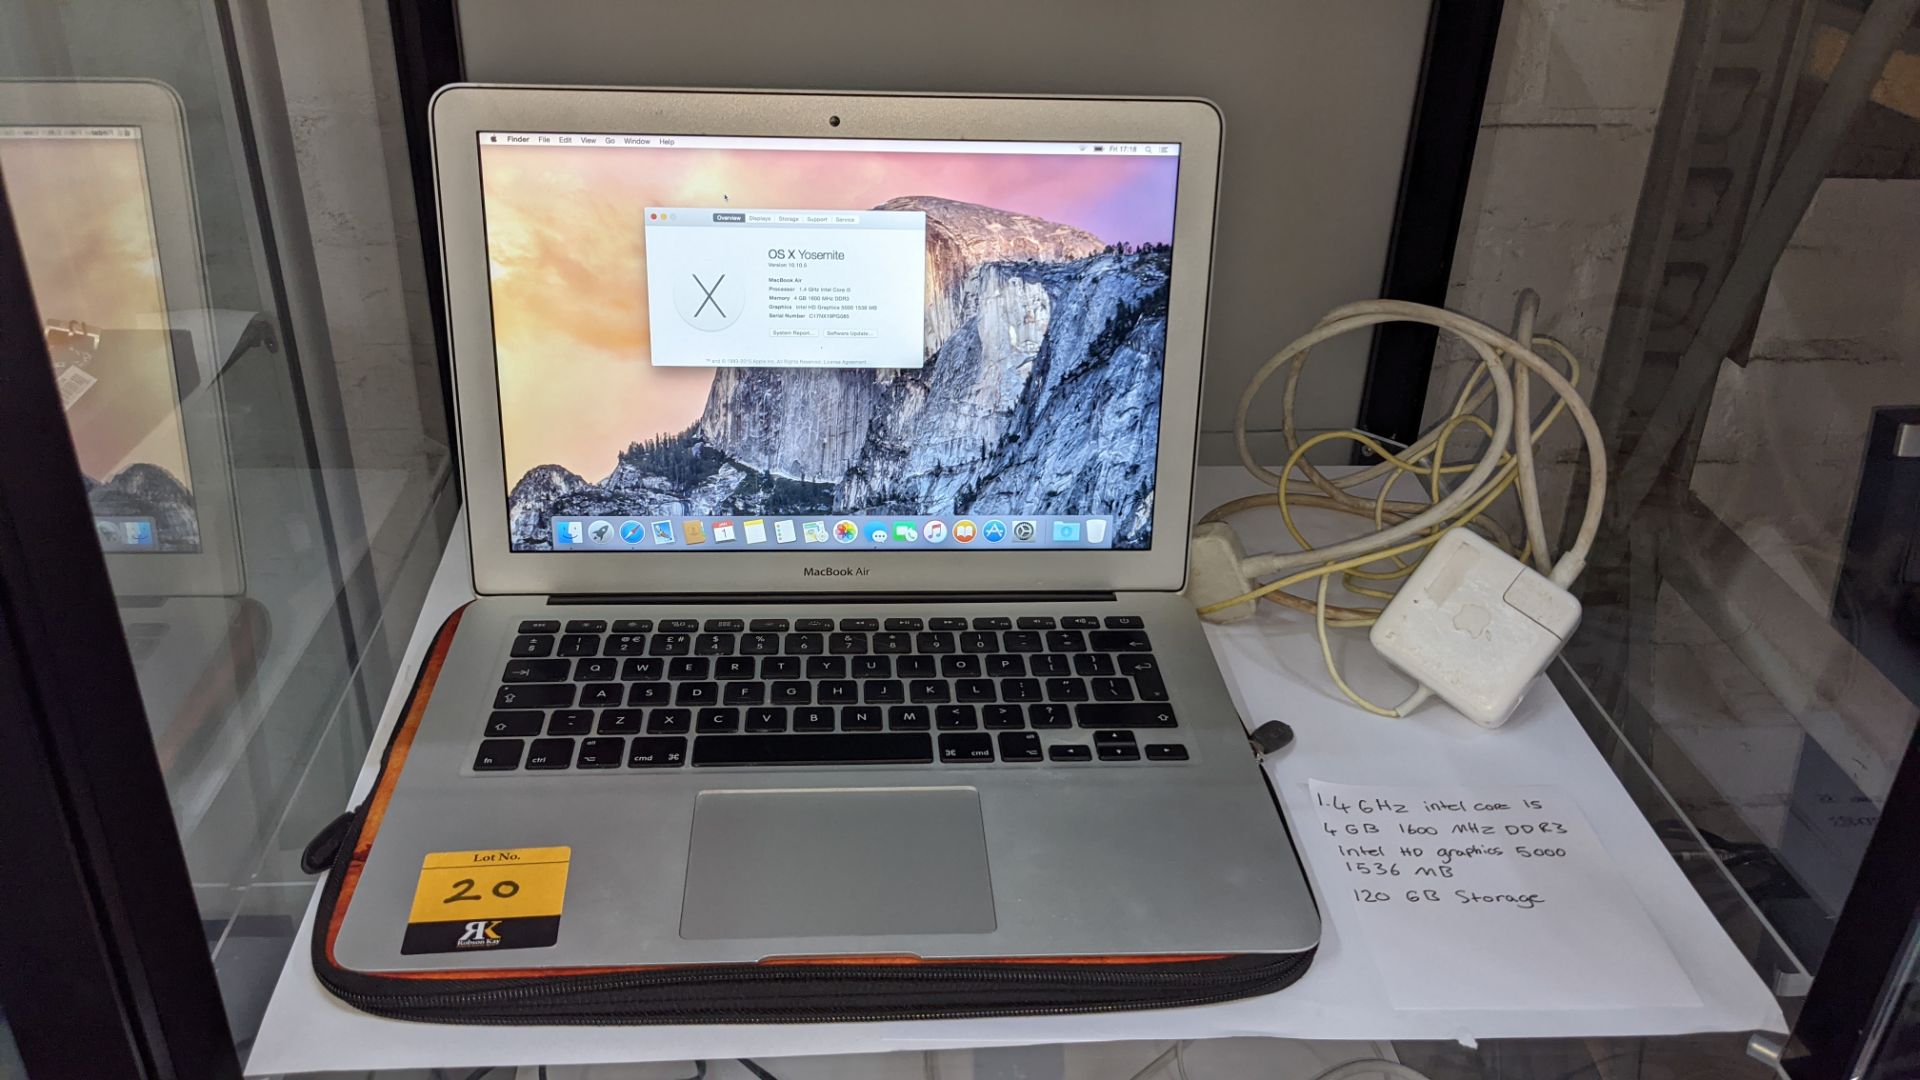 Apple MacBook Air in silver model A1466 with 1.4GHz Intel Core i5, 120Gb storage, 4Gb 1600MHz DDR3, - Image 2 of 12